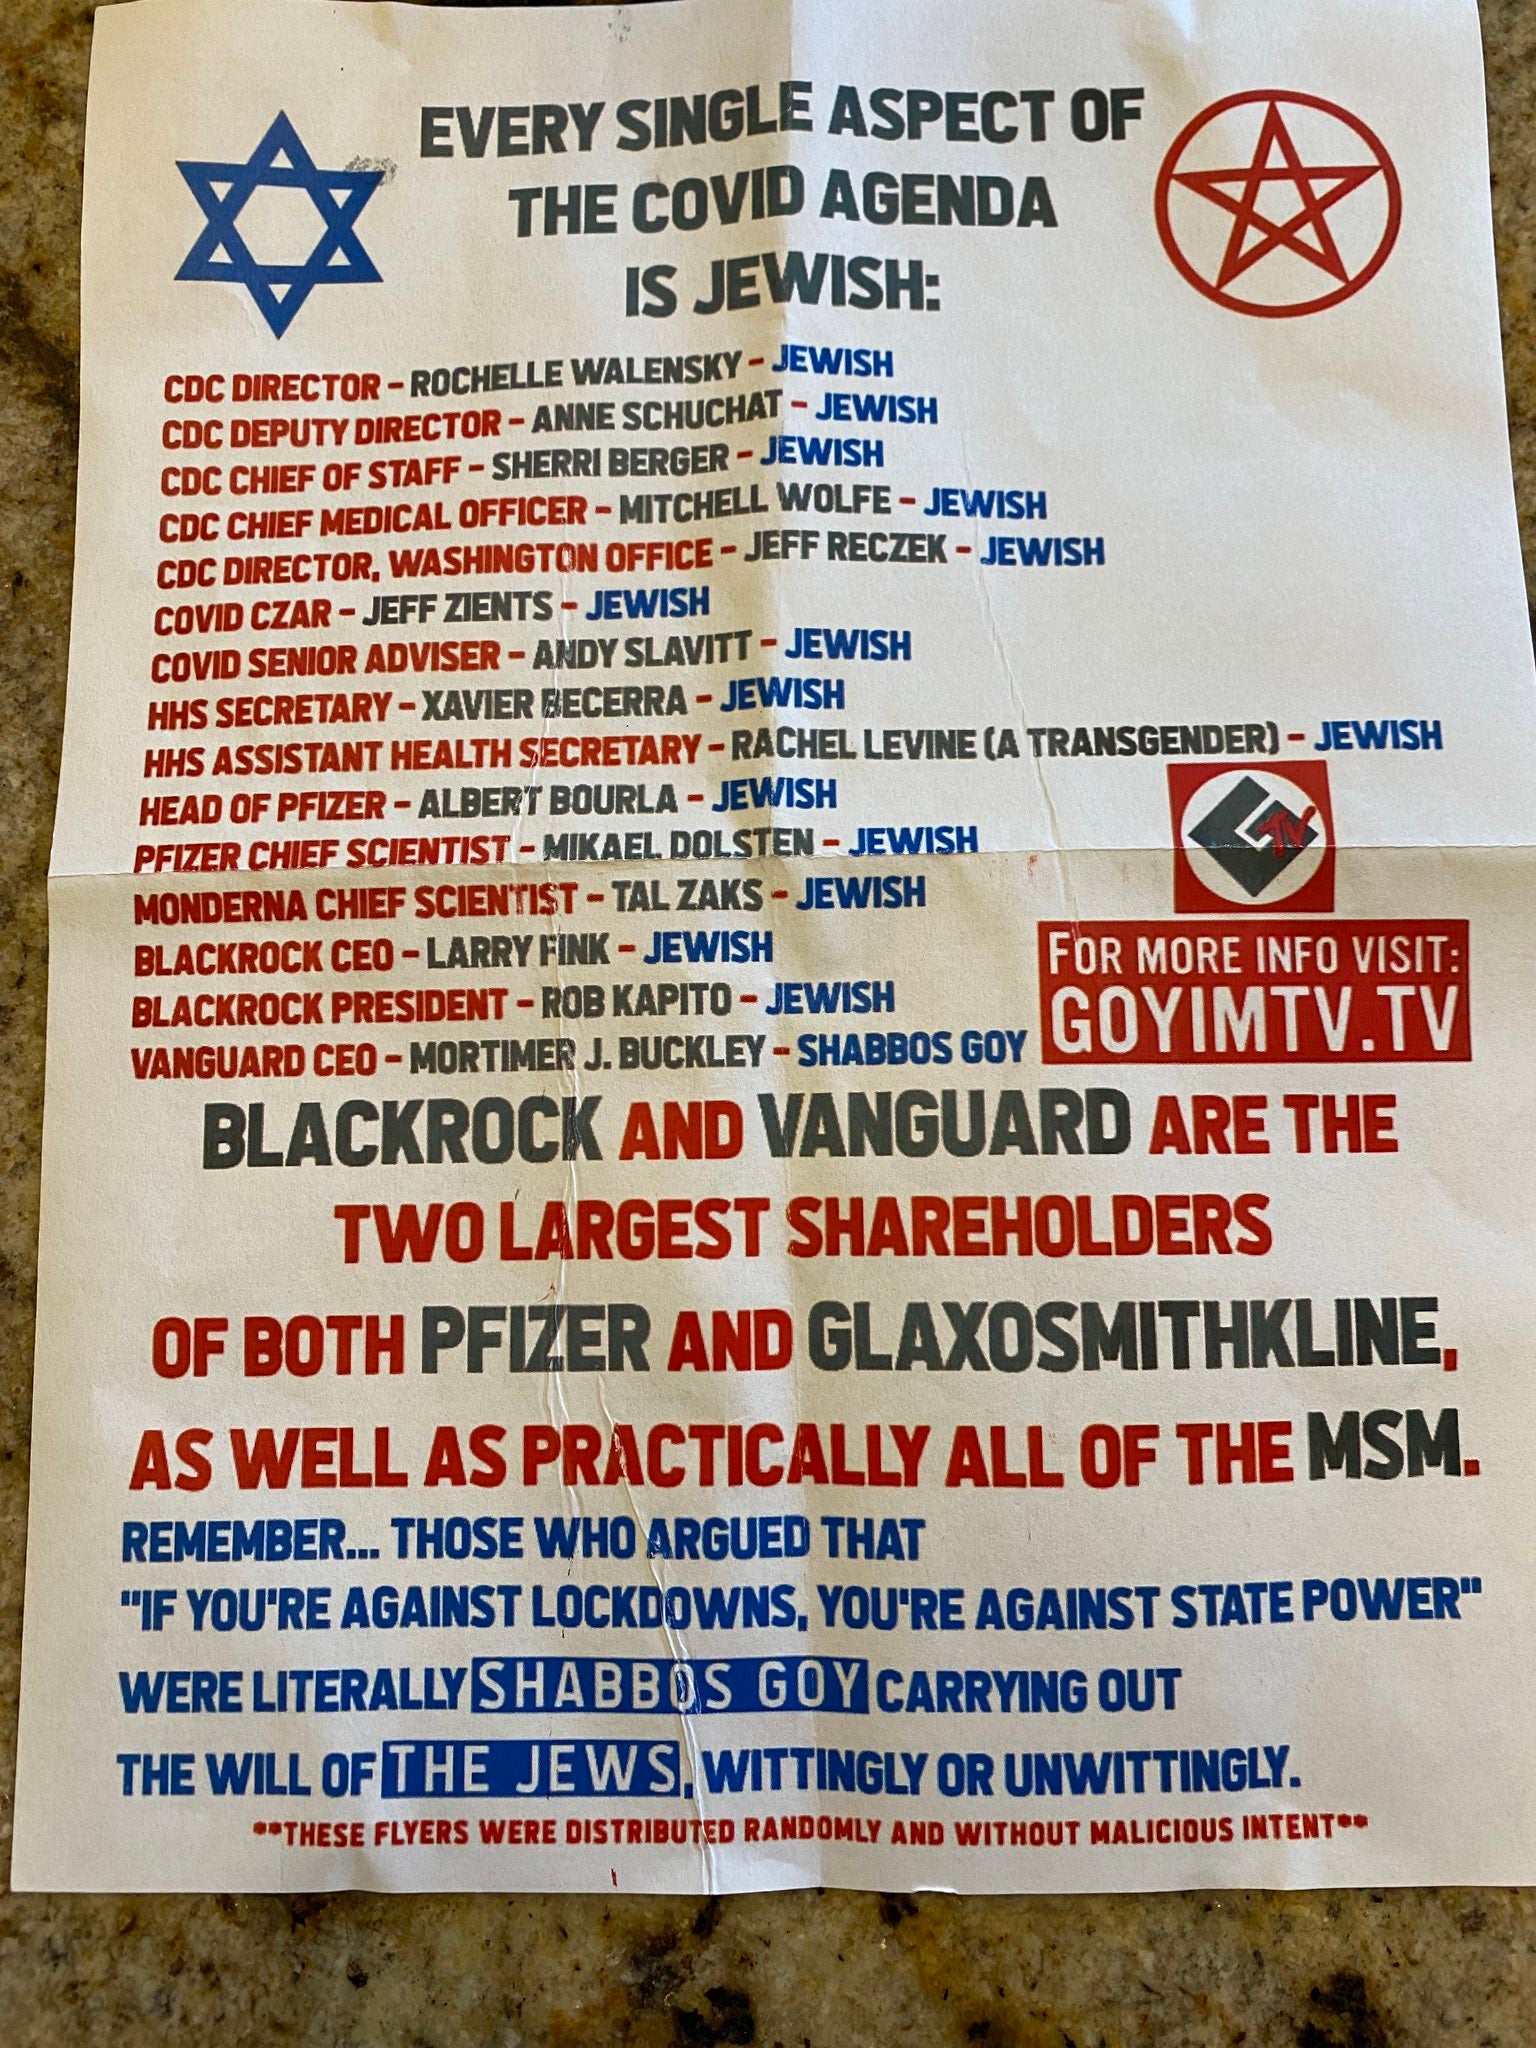 Antisemitic fliers were left overnight at hundreds of homes in the Miami Beach area